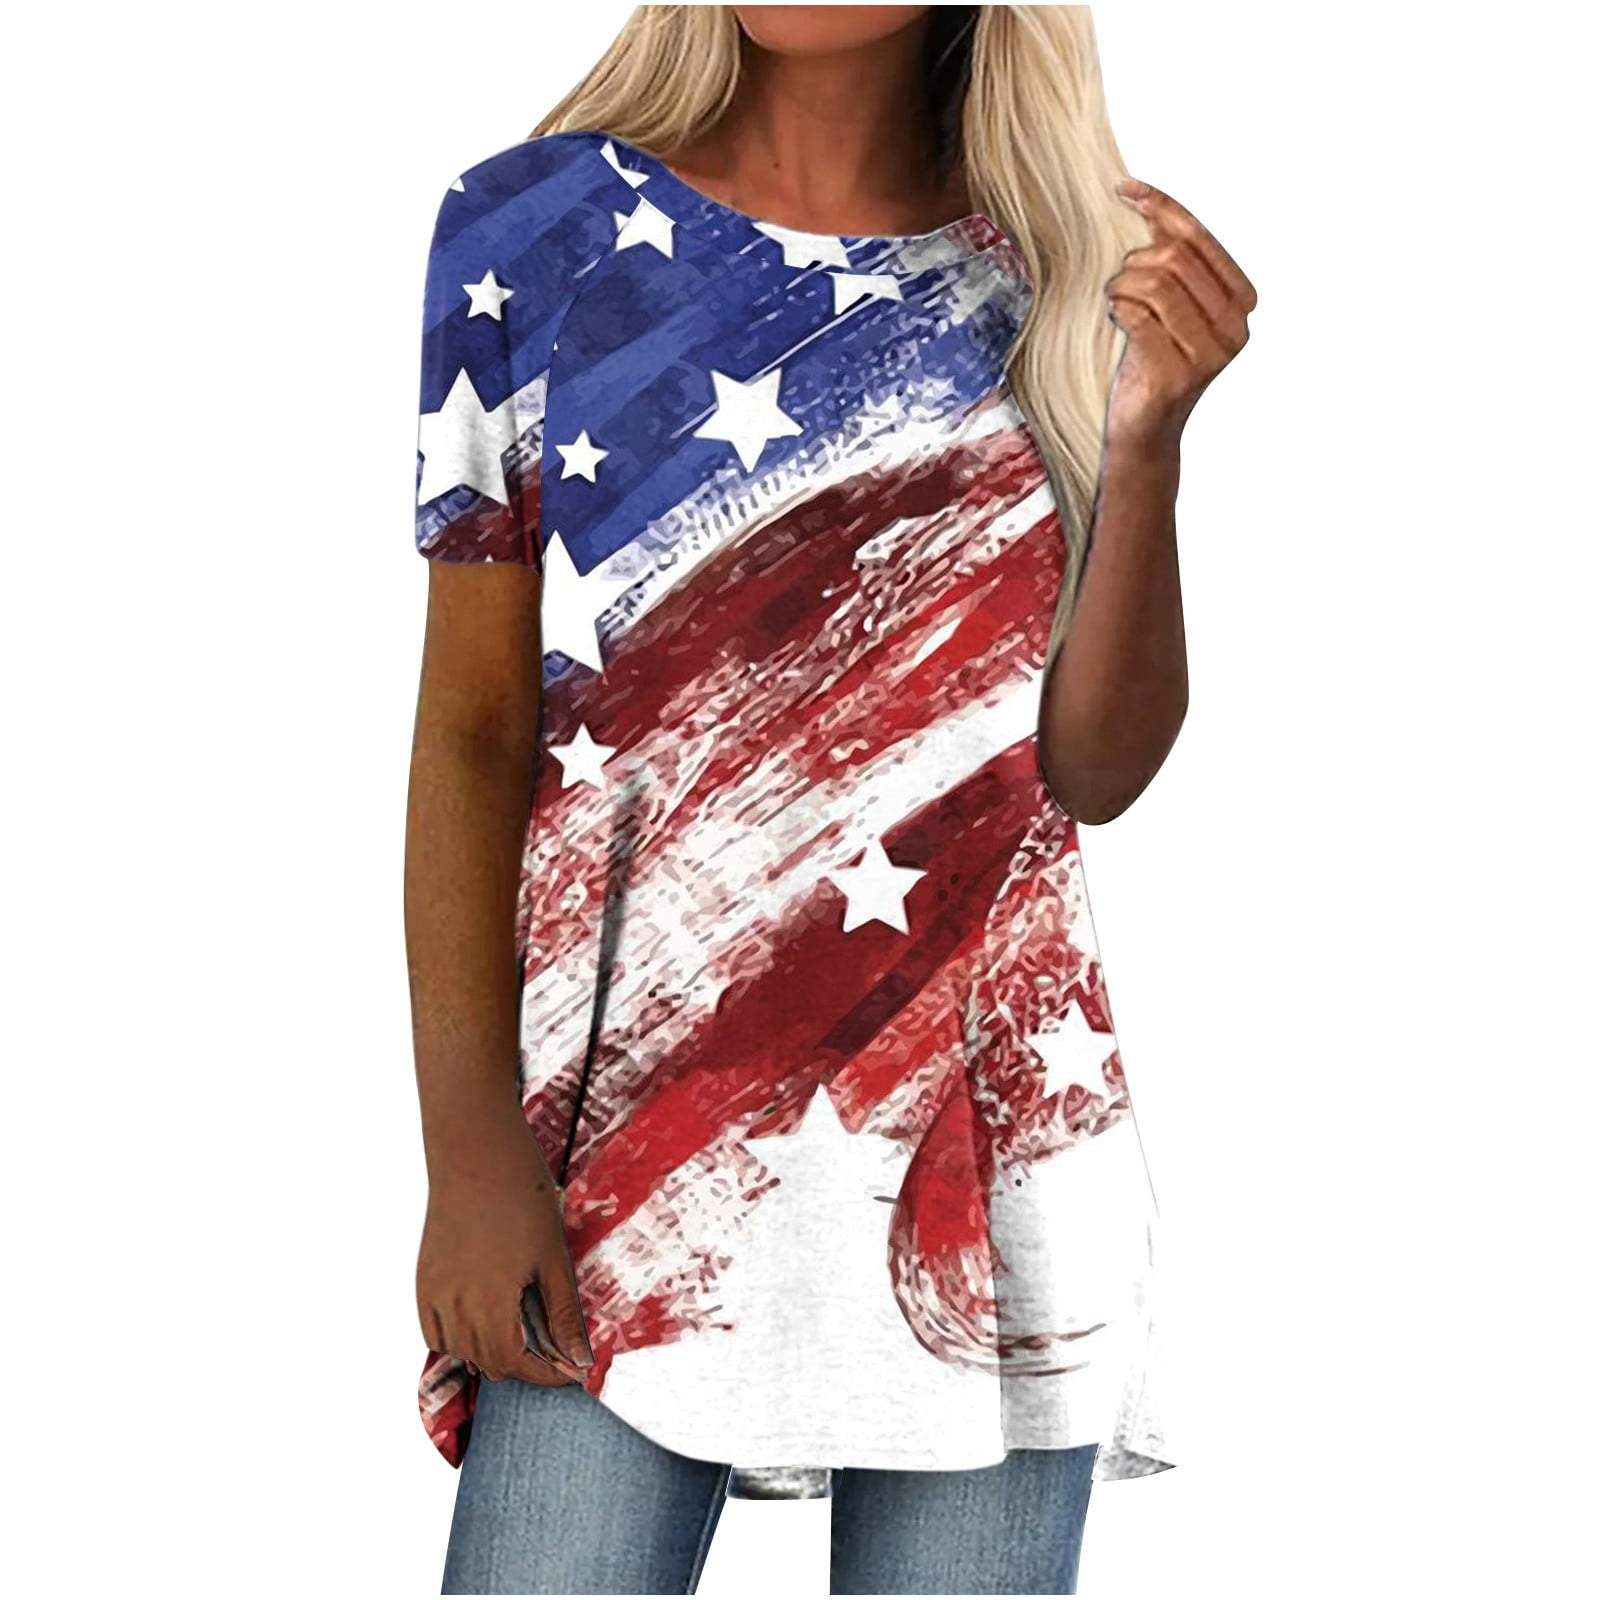 Womens Summer Tops, 4th Fourth of July Patriotic USA American Flag Star  Striped Independence Day T Shirts Tunic Tops Things Under 5 Dollars Under  20.00 Dollar Items For Women #1 